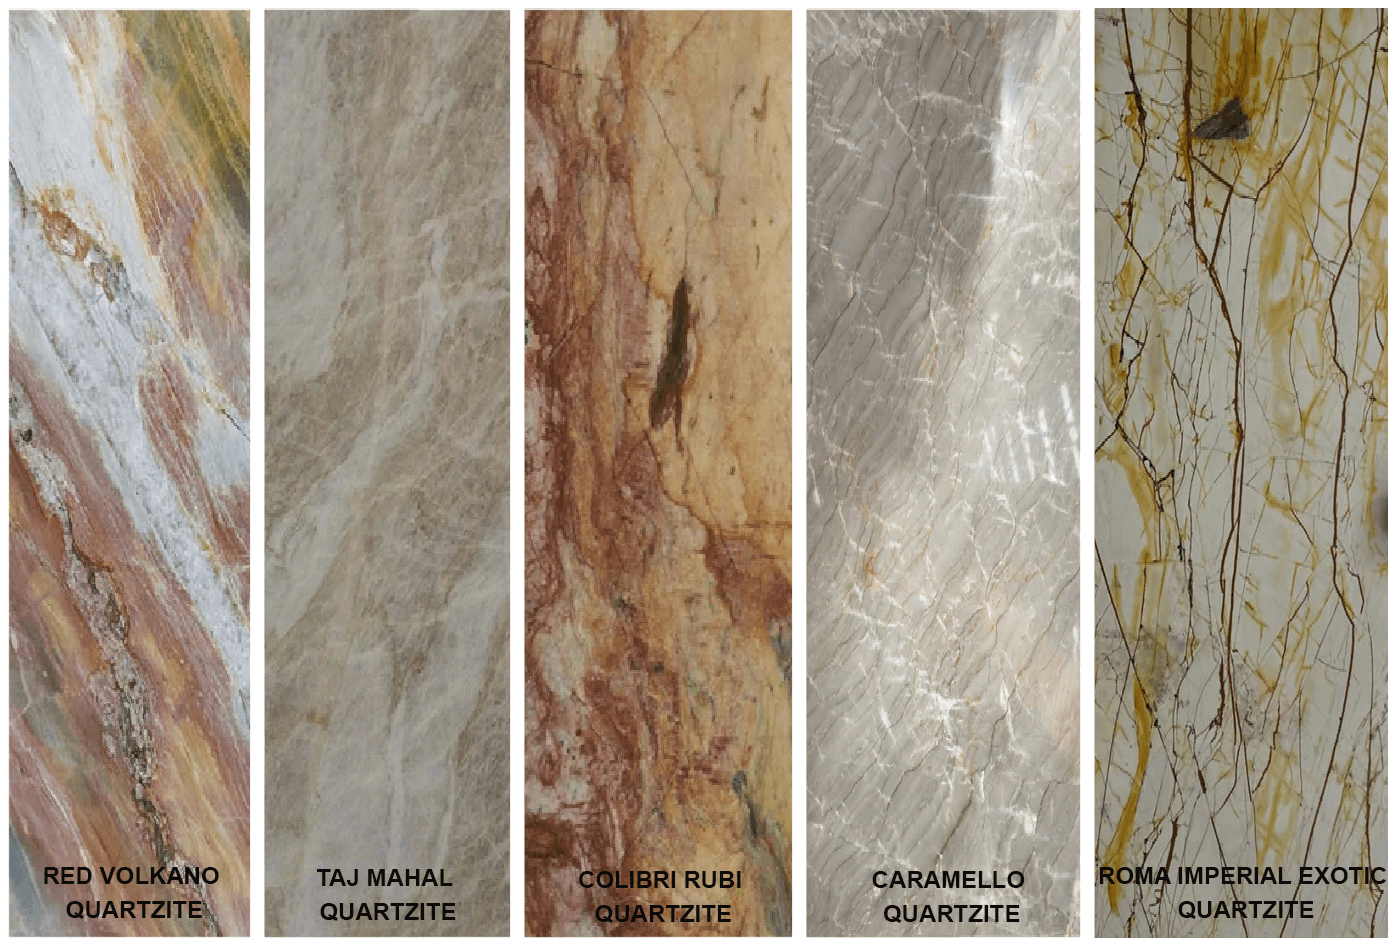 Check Out Our Other Facsimile Patterned Stones to Refurbish Your Kitchens and Bathrooms